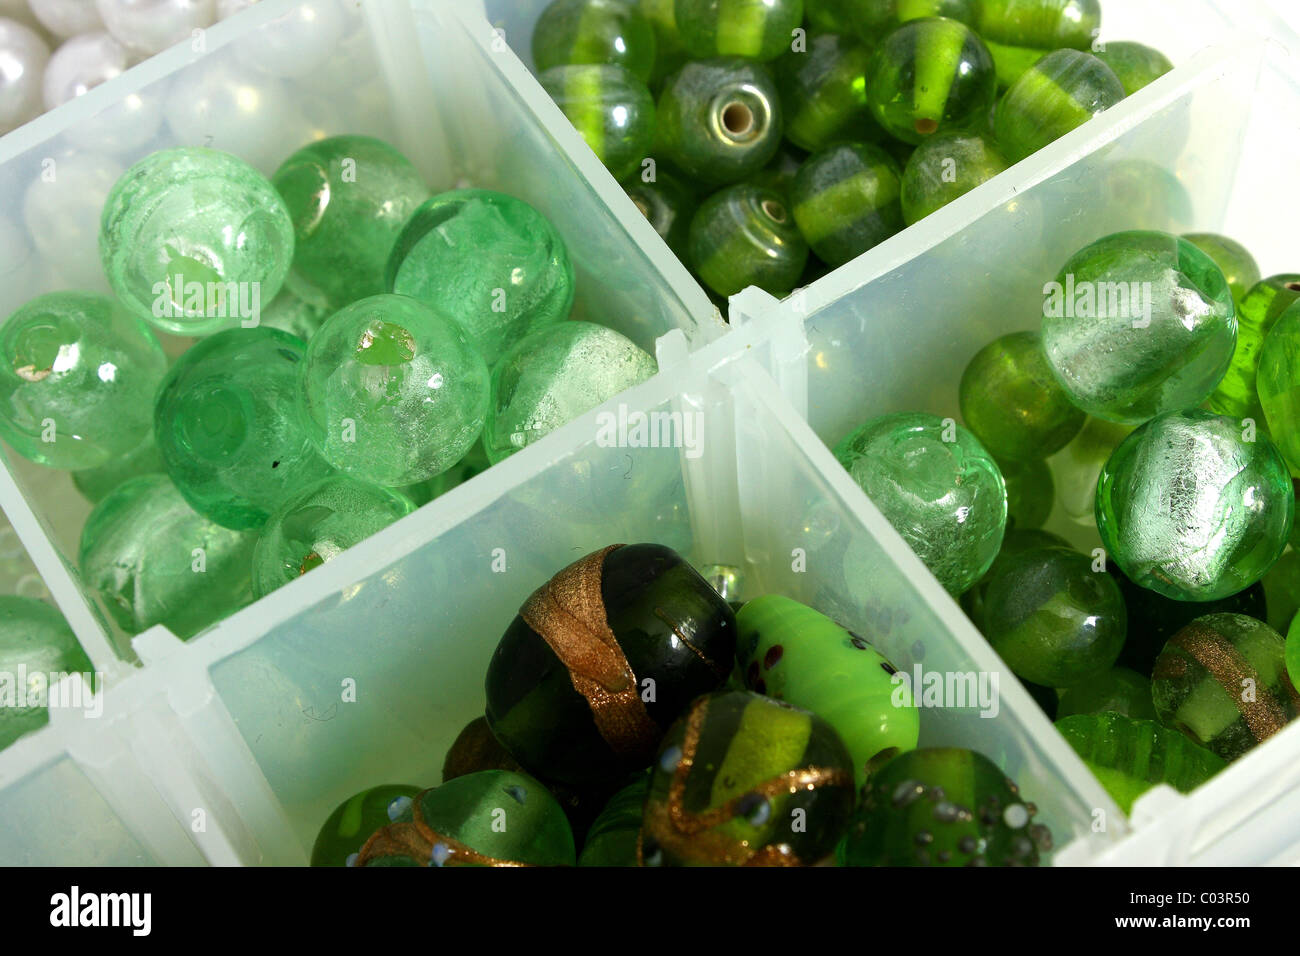 Beautiful glass beads in a beadwork box for jewelery making as a craft, work or hobby. Stock Photo